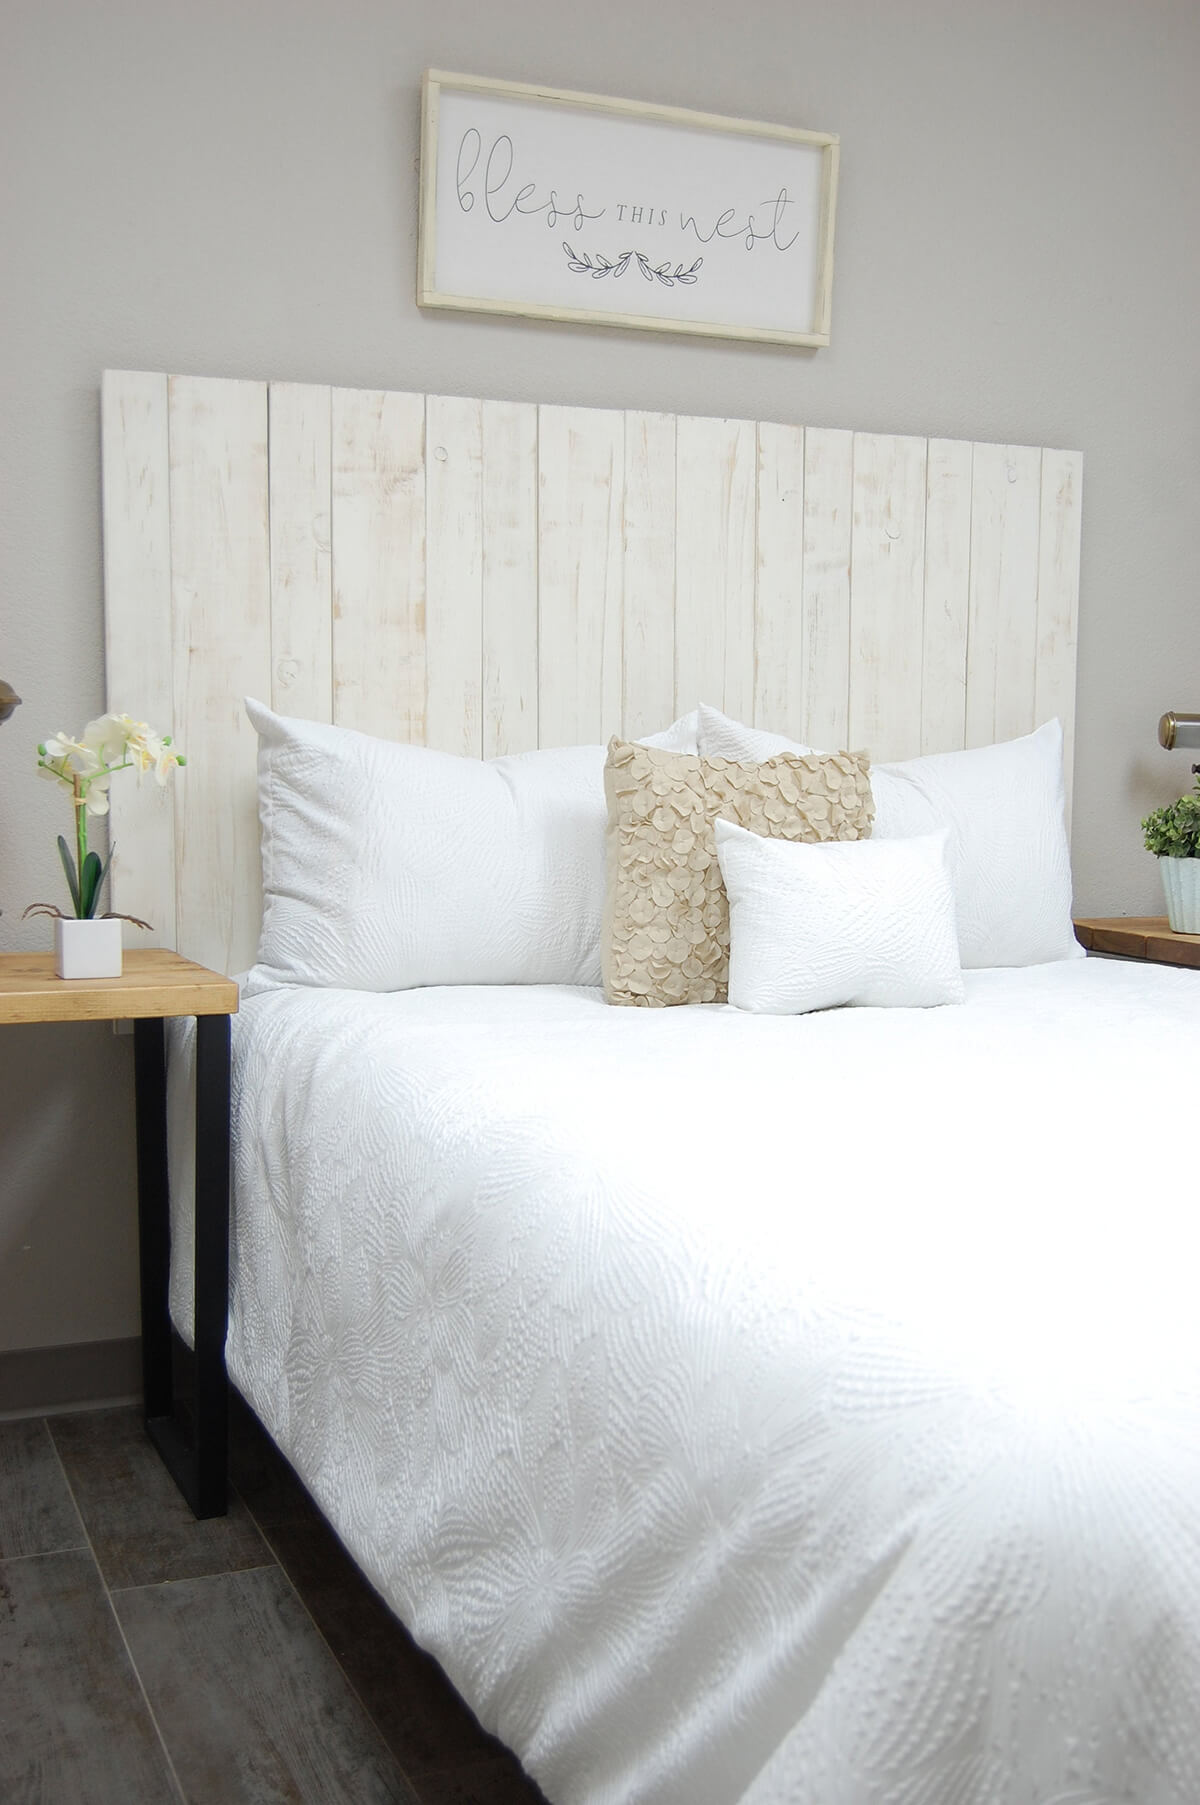 Timeless Whitewashed Pallet Wood, Pallet Bed Headboard